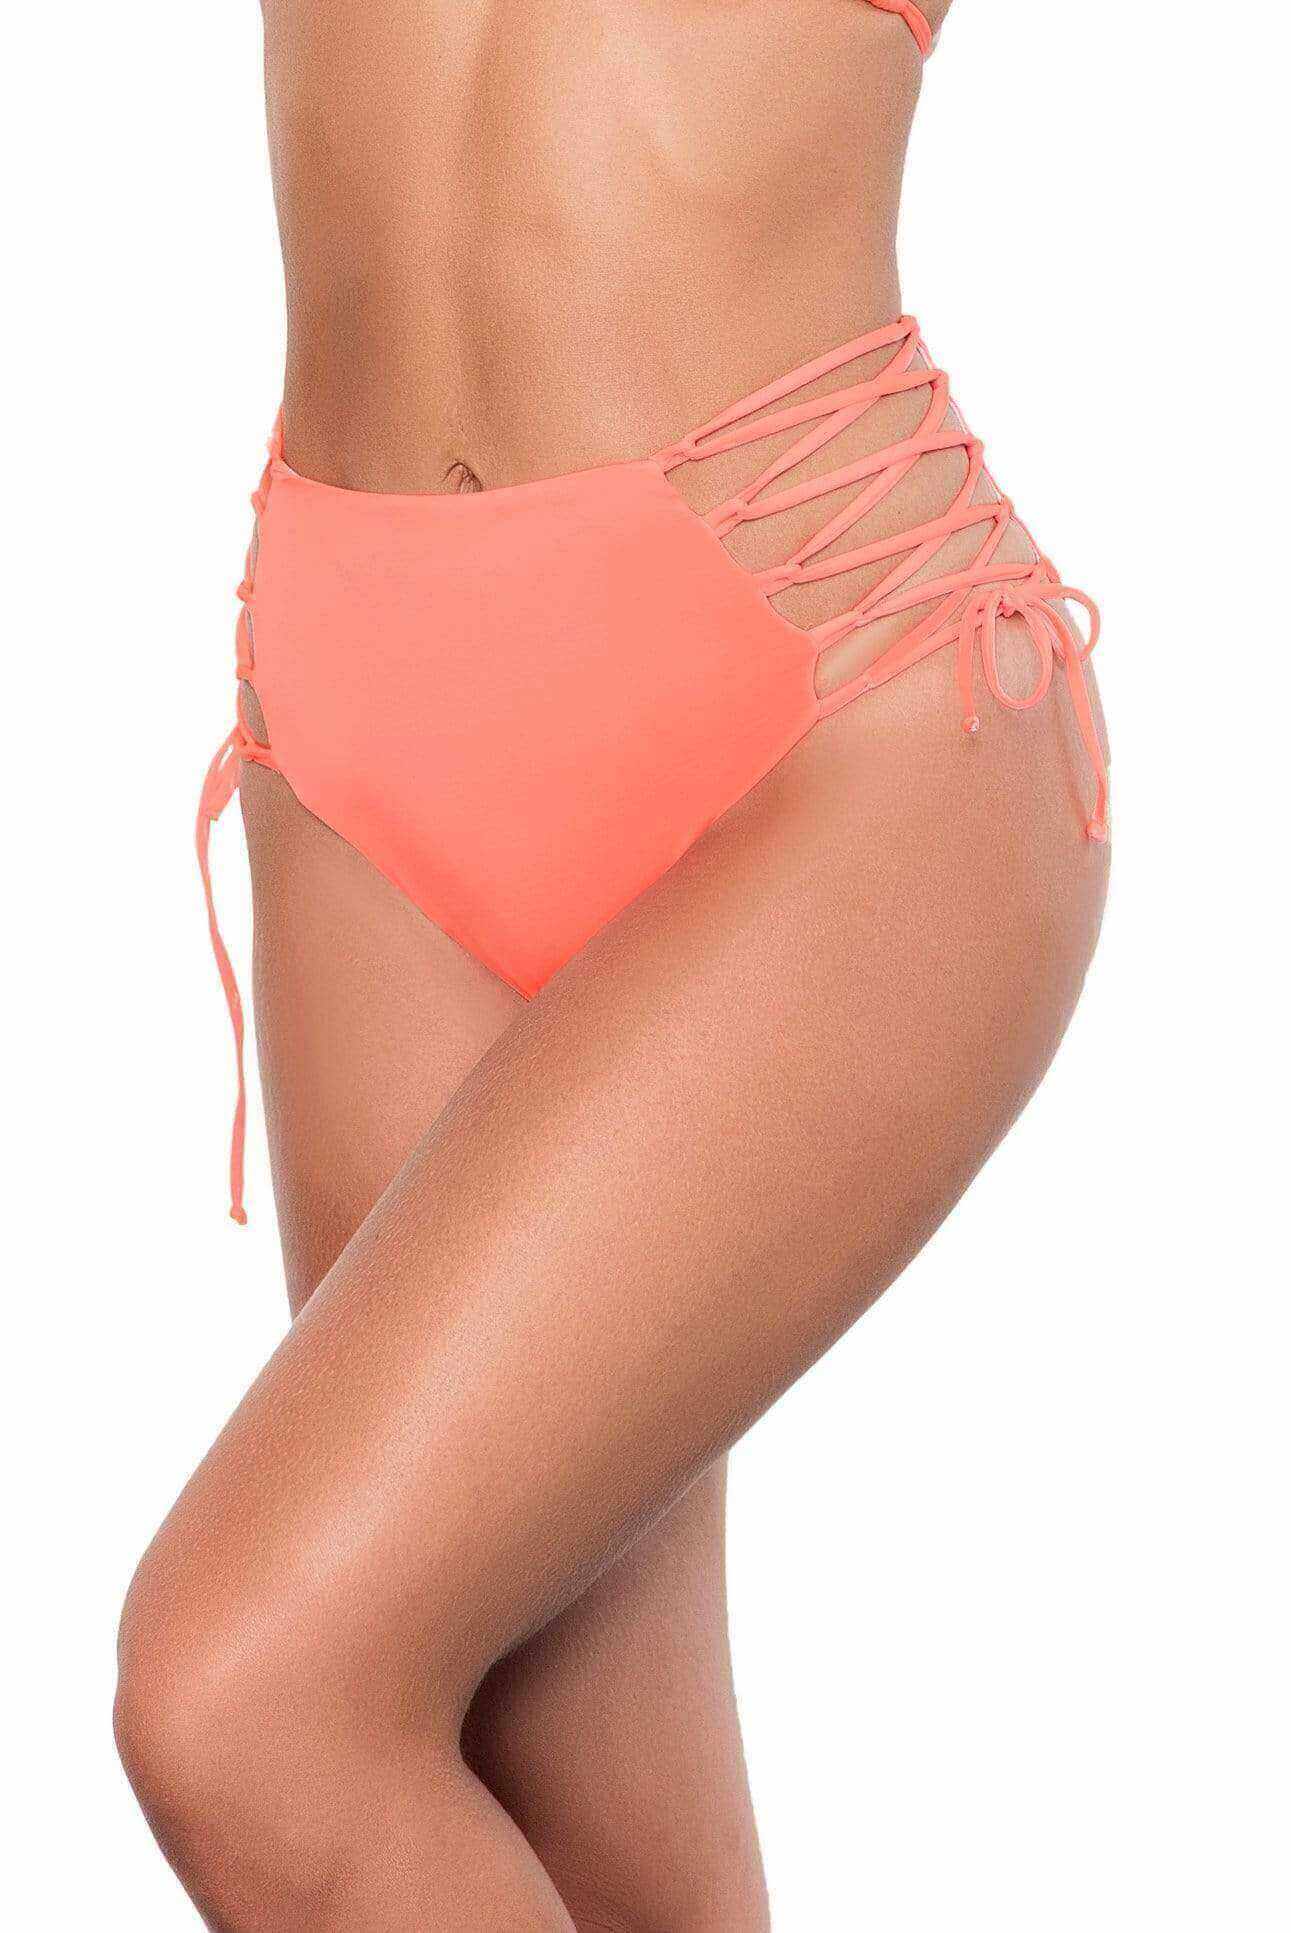 Mapale Apparel & Accessories > Clothing > Swimwear Orange / S/M Black Strap Side Tie High Waist Bottom Separates (Many colors available) Black Strap Side Tie High Waist Bottom Separates | MAPALE 6649